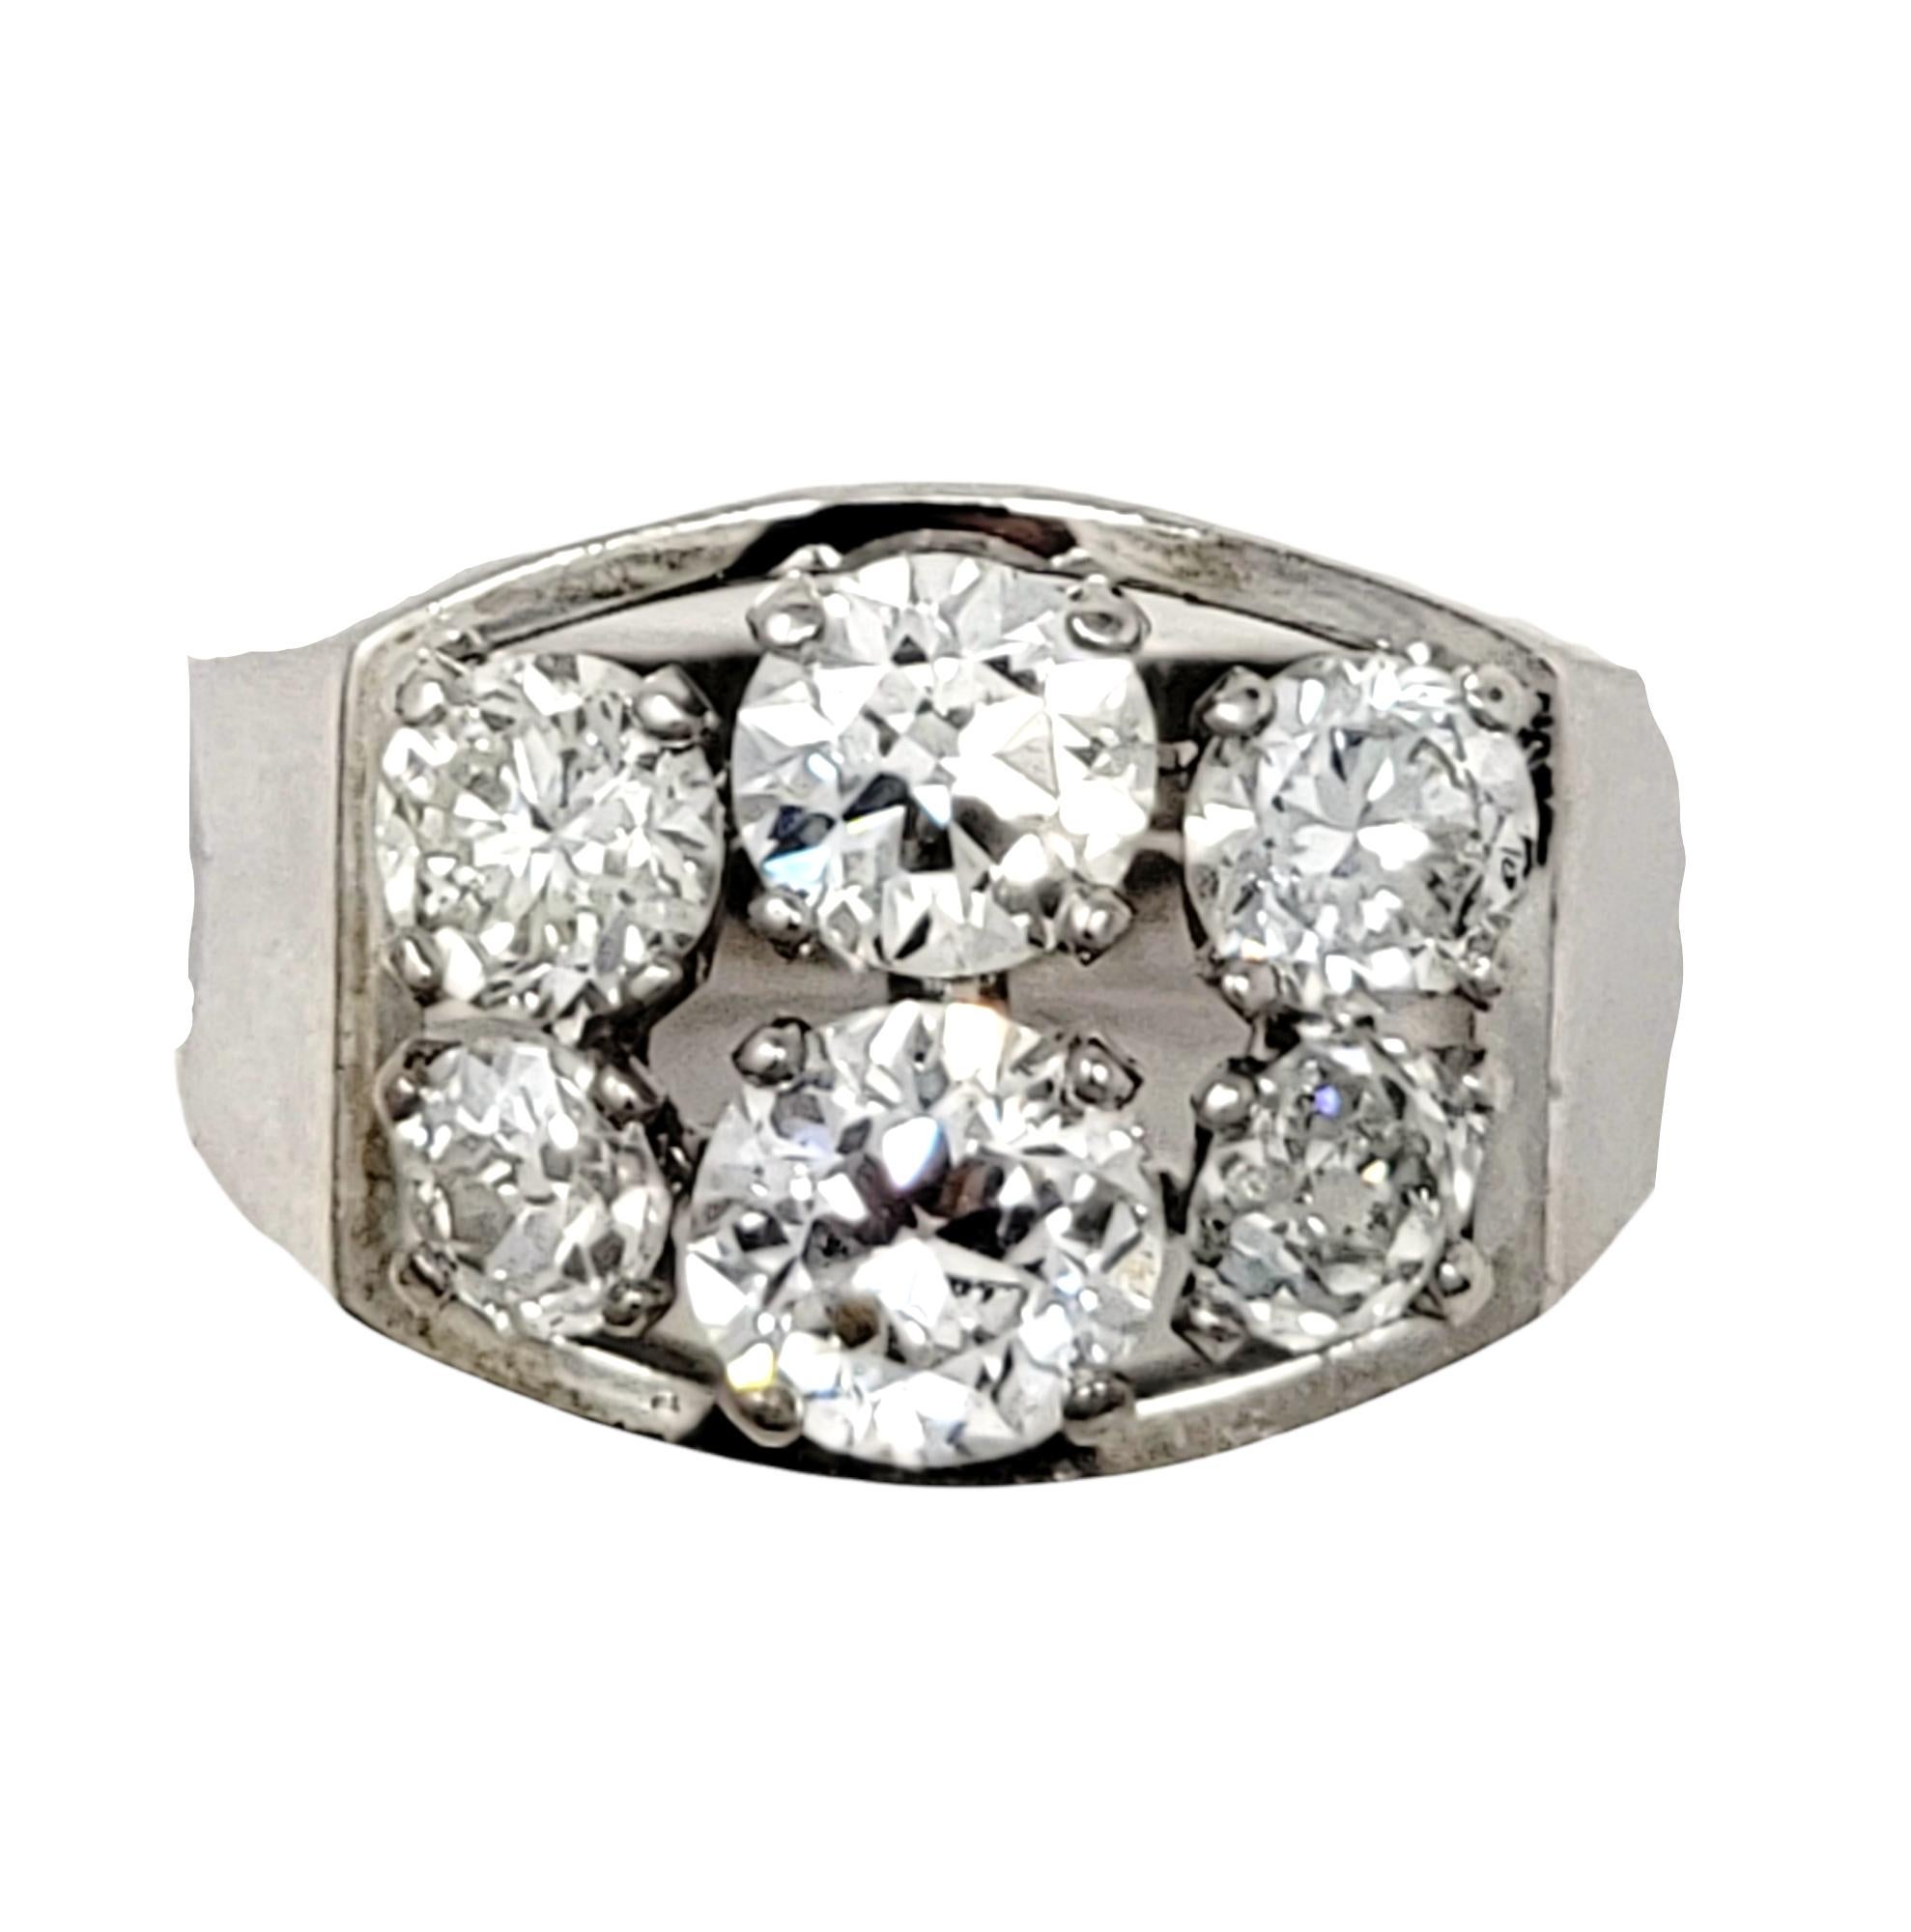 Ring size: 6.75

Bold and brilliant six stone diamond band ring. This incredible and unique piece features 4 variations of round diamonds; Semi-Modern, Old Mine, Old European and Round Brilliant. The 2.75 carats of glittering natural diamonds are